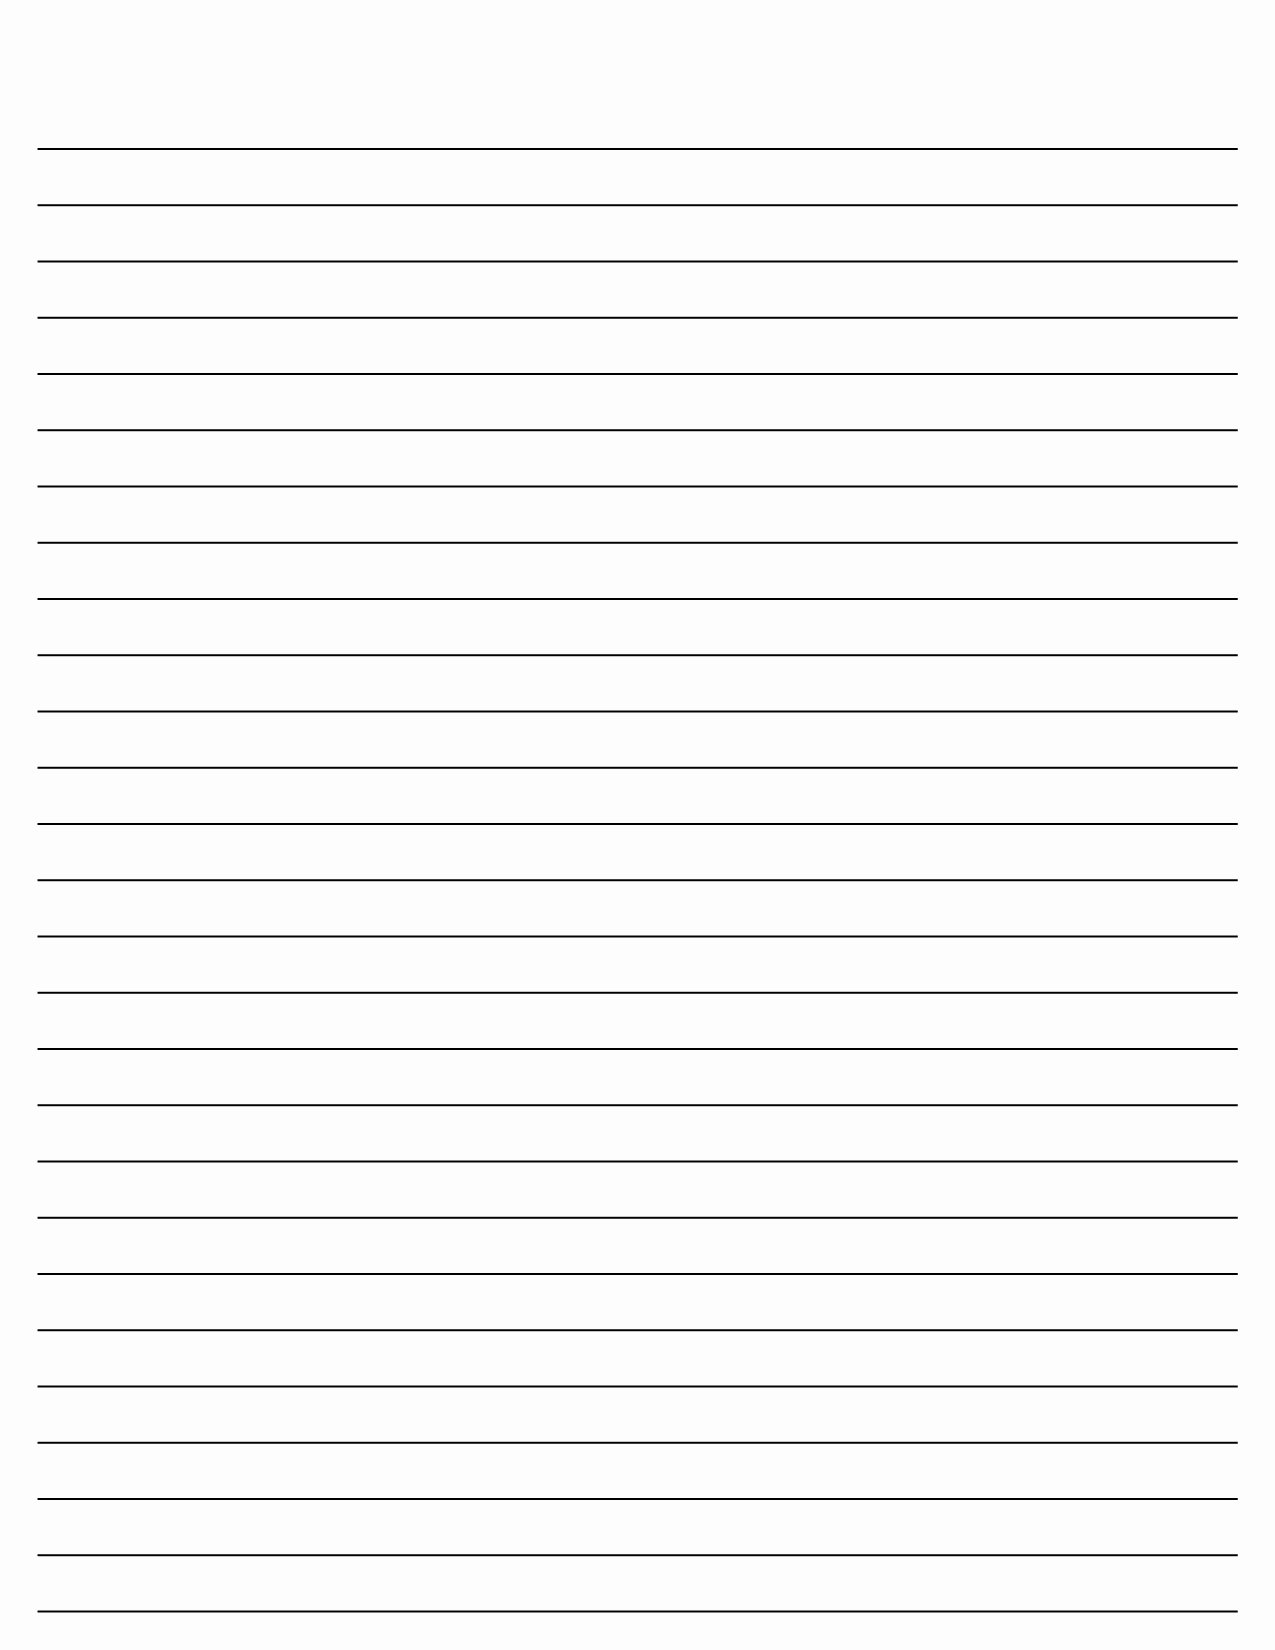 Printable Lined Paper for Kids Awesome Best S Of Lined Writing Papers Free Print Free